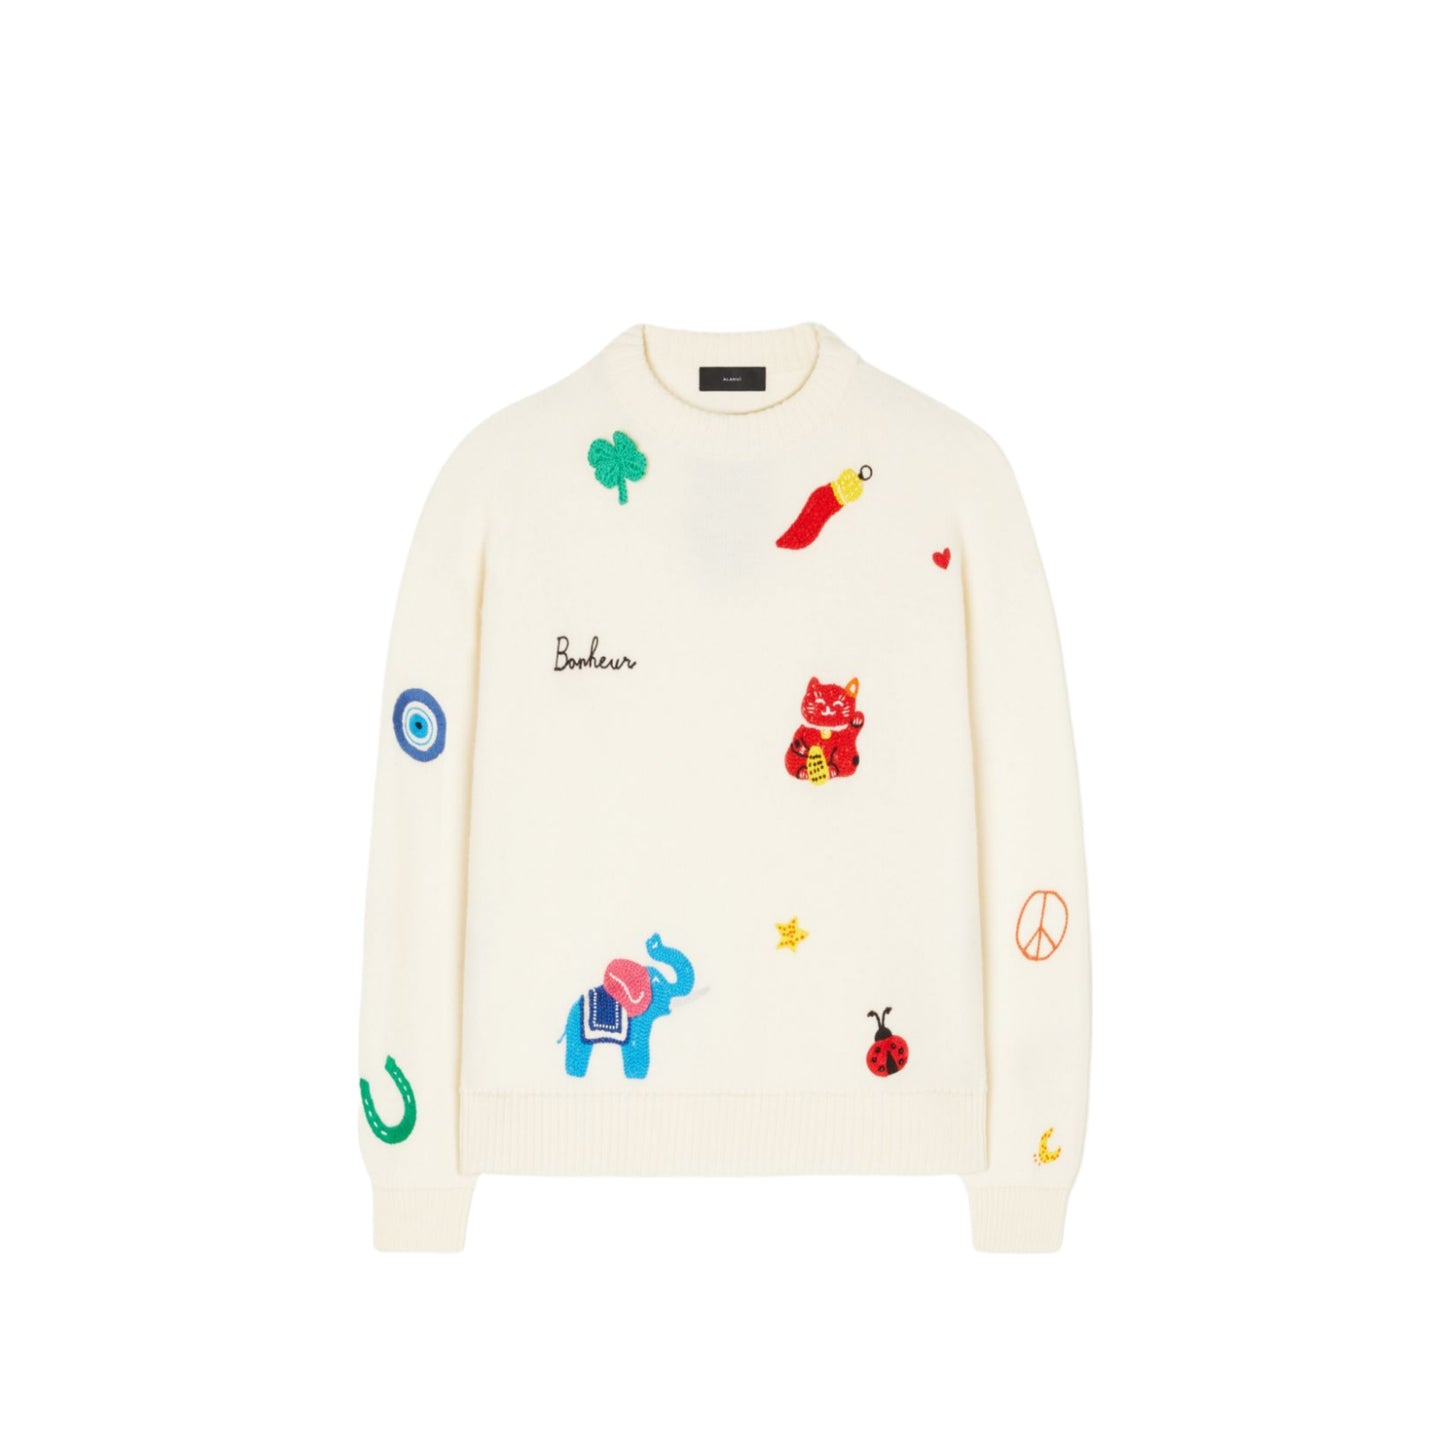 【ALANUI】＜WOMEN'S＞LUCKY CHARM EMBROIDERED SWEATER